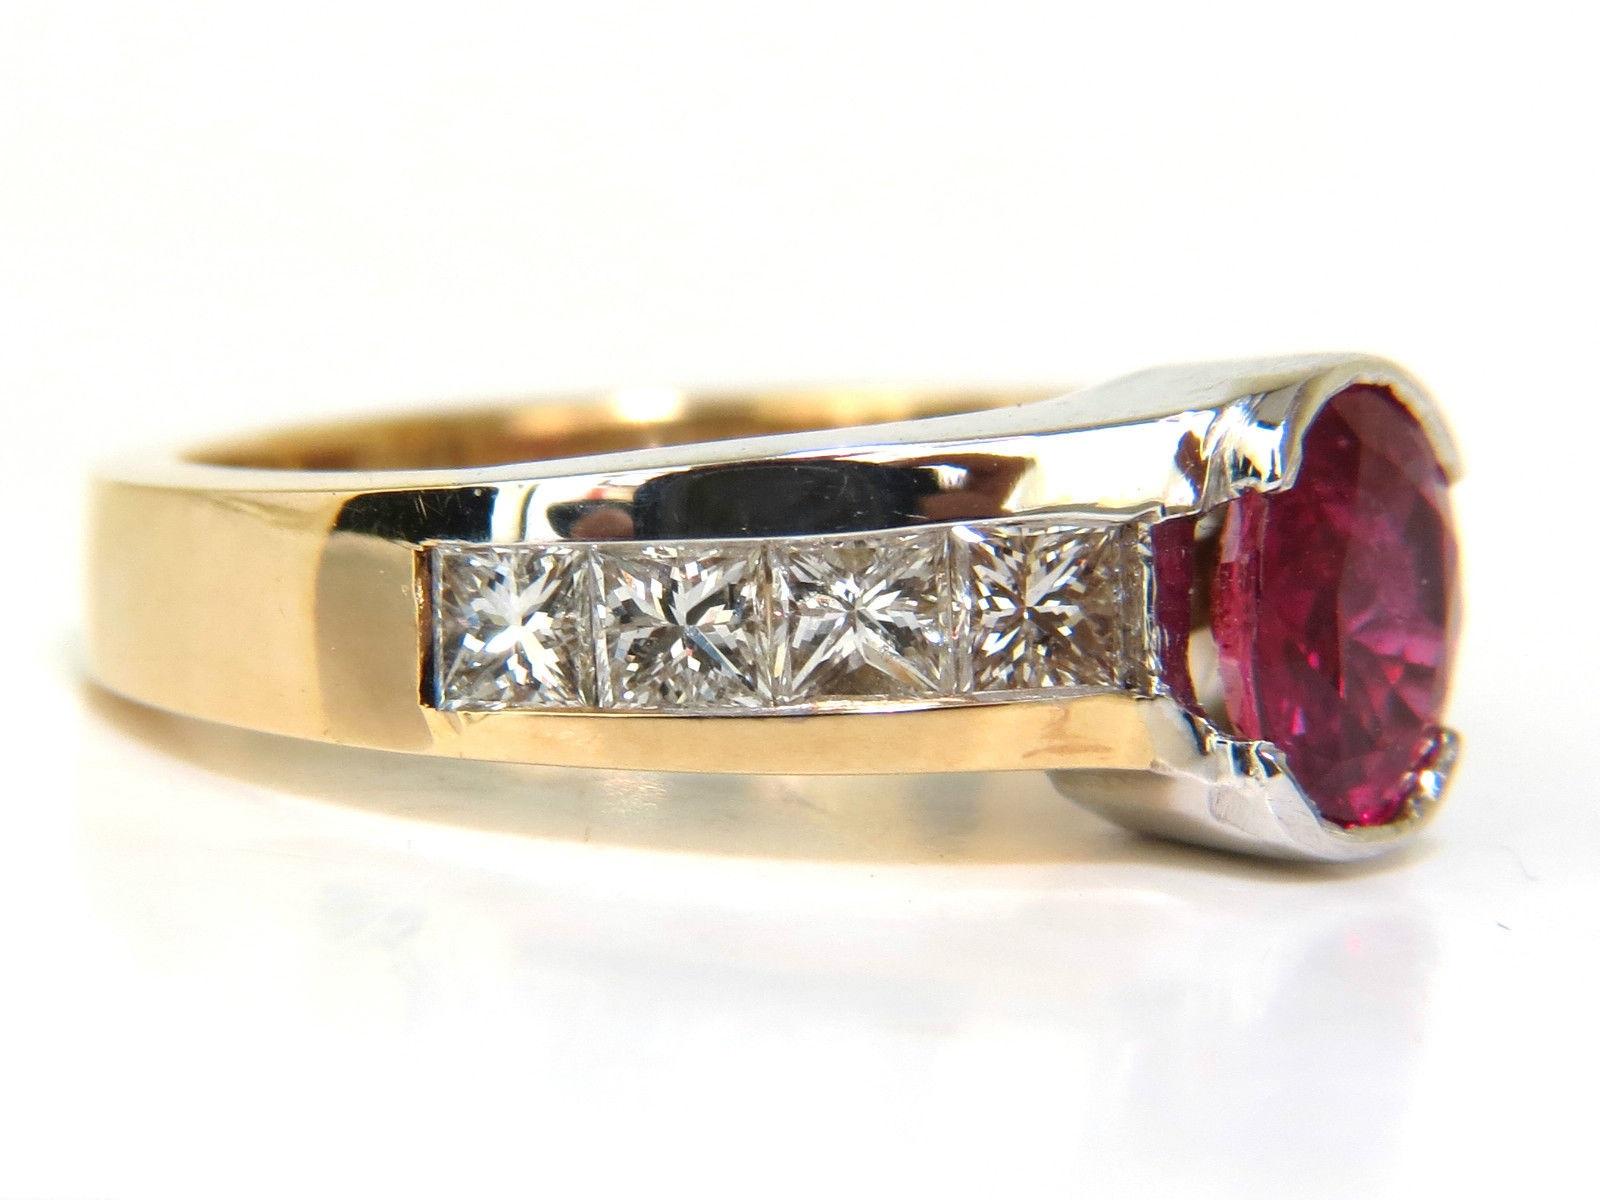 1.16ct. Natural  oval ruby

Fully faceted cut

Transparent

Clean clarity, vibrant color

The Pigeon Blood

 

 1.50ct. Princess Cut Diamonds

Fine sparkles

Vs-2 clarity, G-color

14kt. Yellow gold.

Item: 5.9gms.

Ring is 7.8mm wide

Current size: